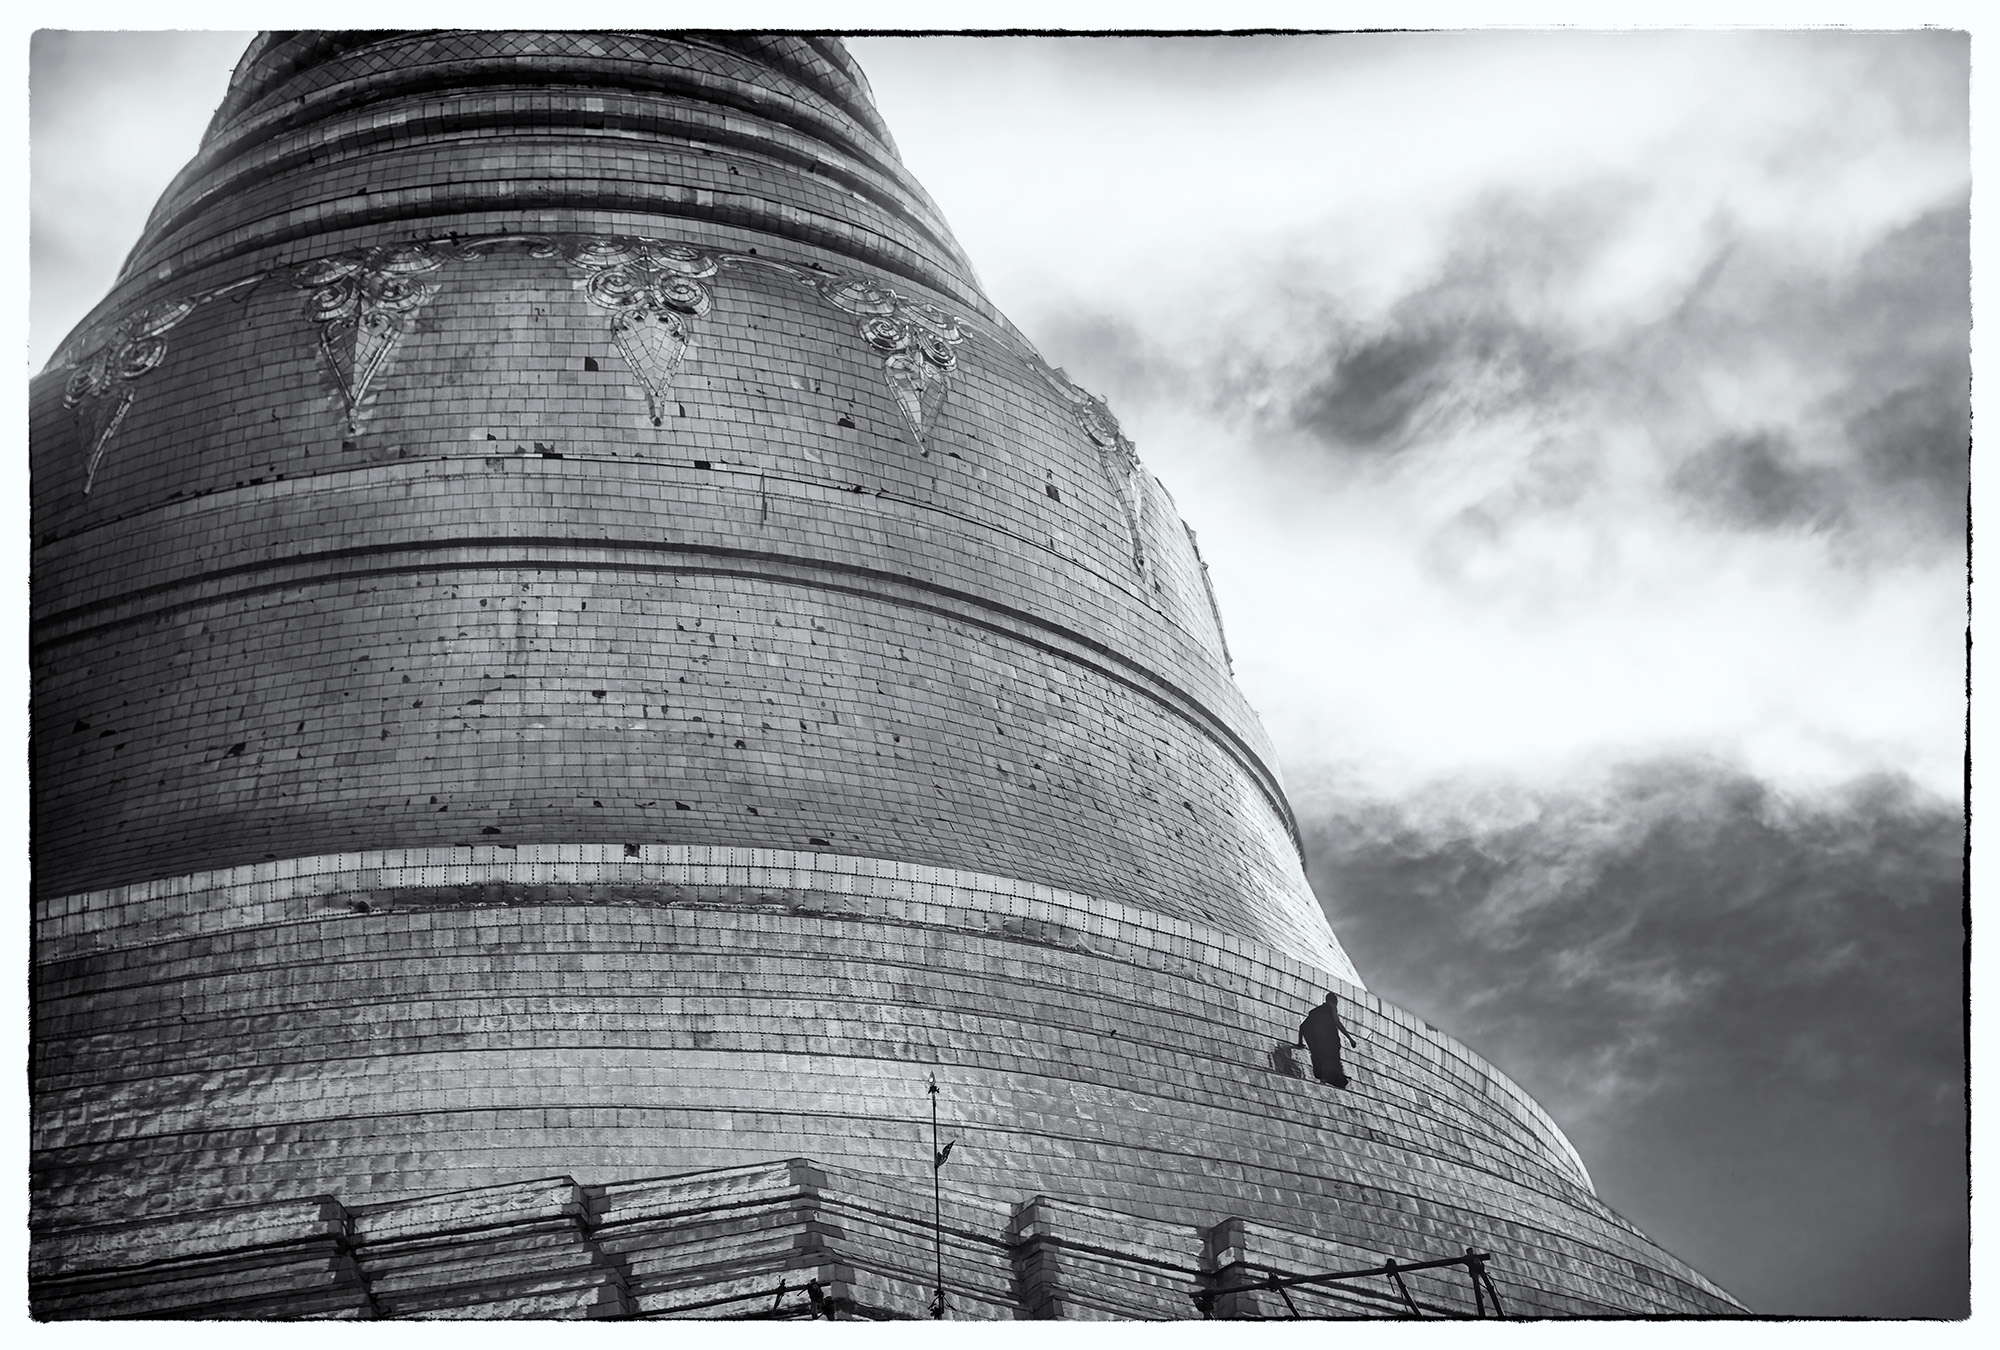 In this monochromatic image, a monk walks along the edge of the grand Shewadago Pagoda in Yangon, Myanmar. The sheer enormity...